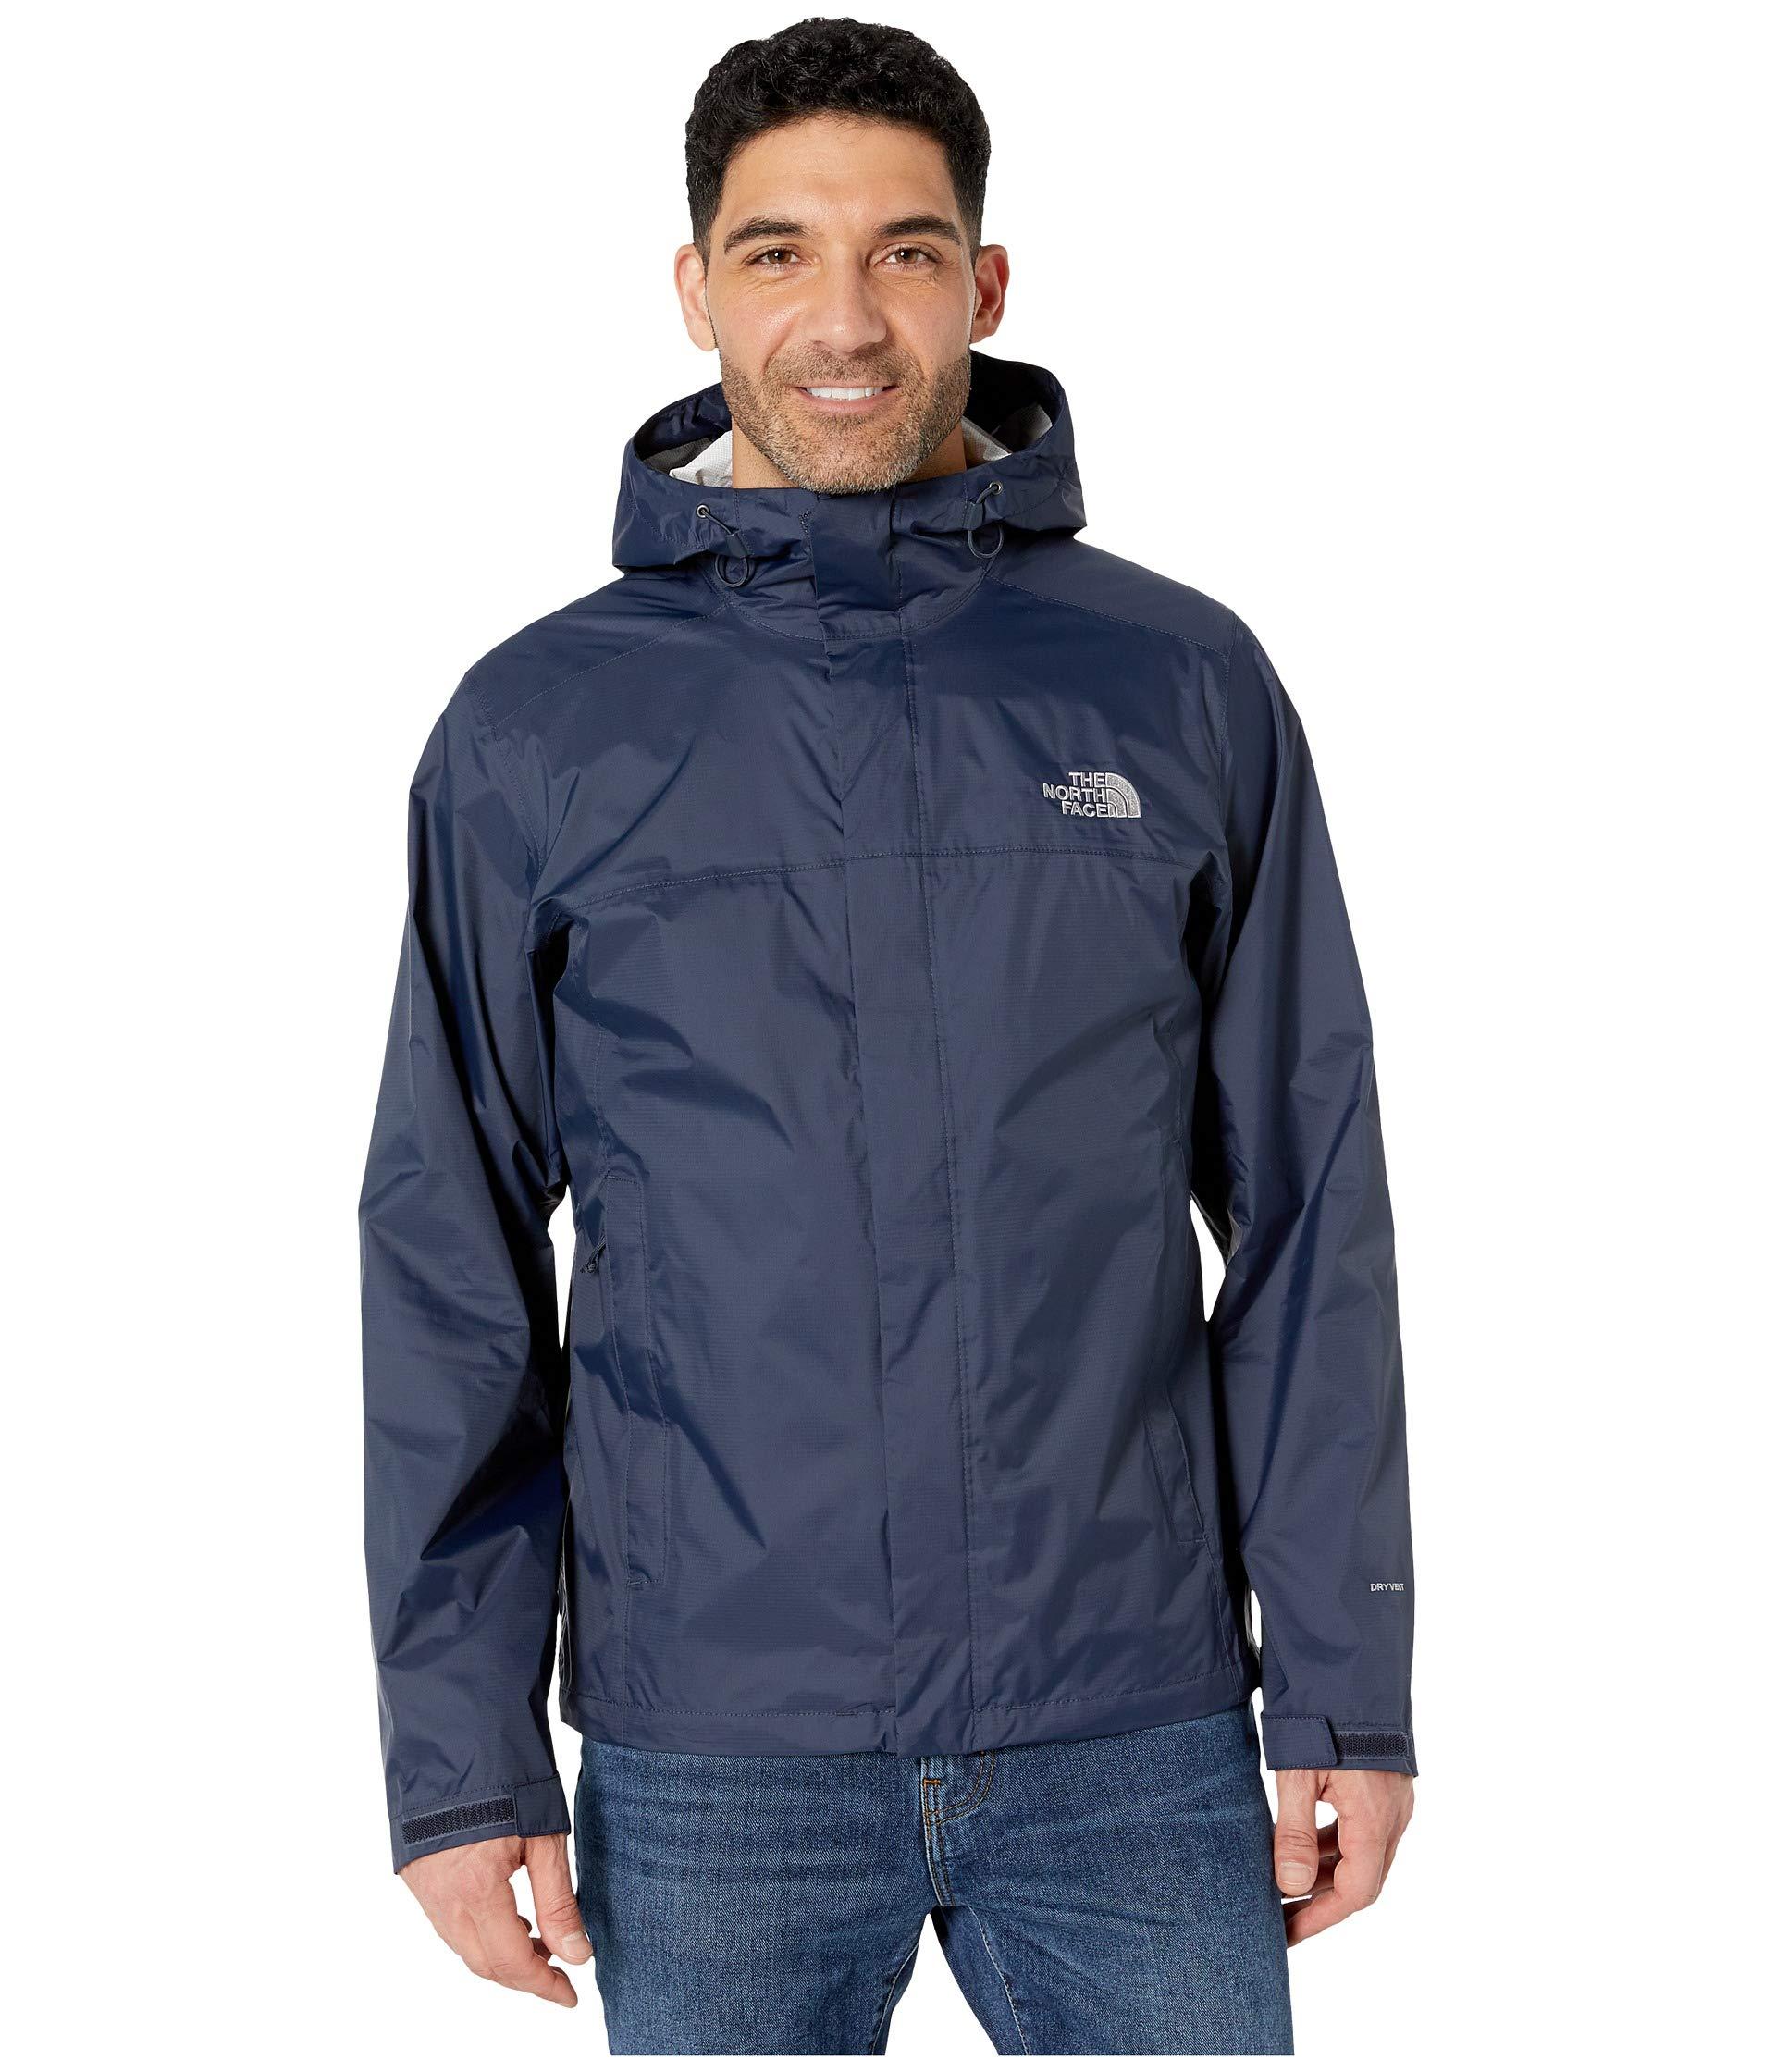 The North Face Synthetic Venture 2 Jacket in Navy (Blue) for Men - Lyst